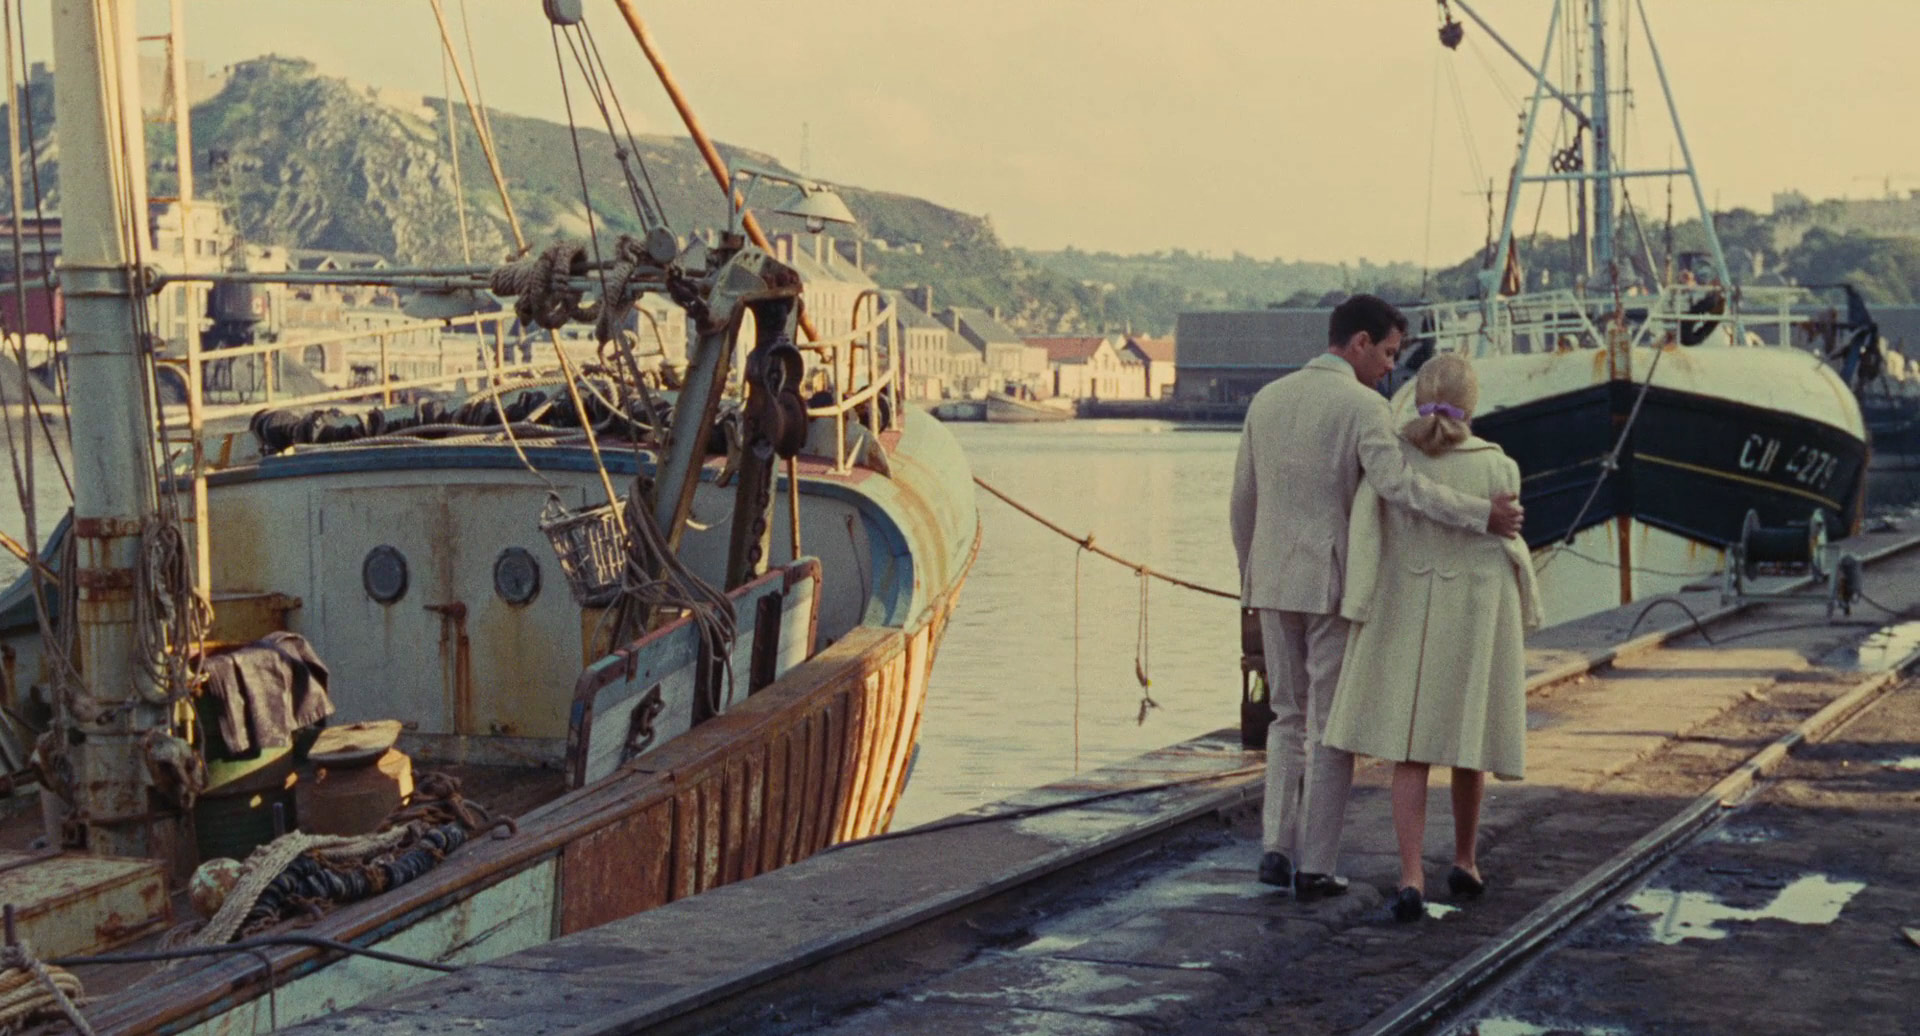 boat wharf in The Umbrellas of Cherbourg